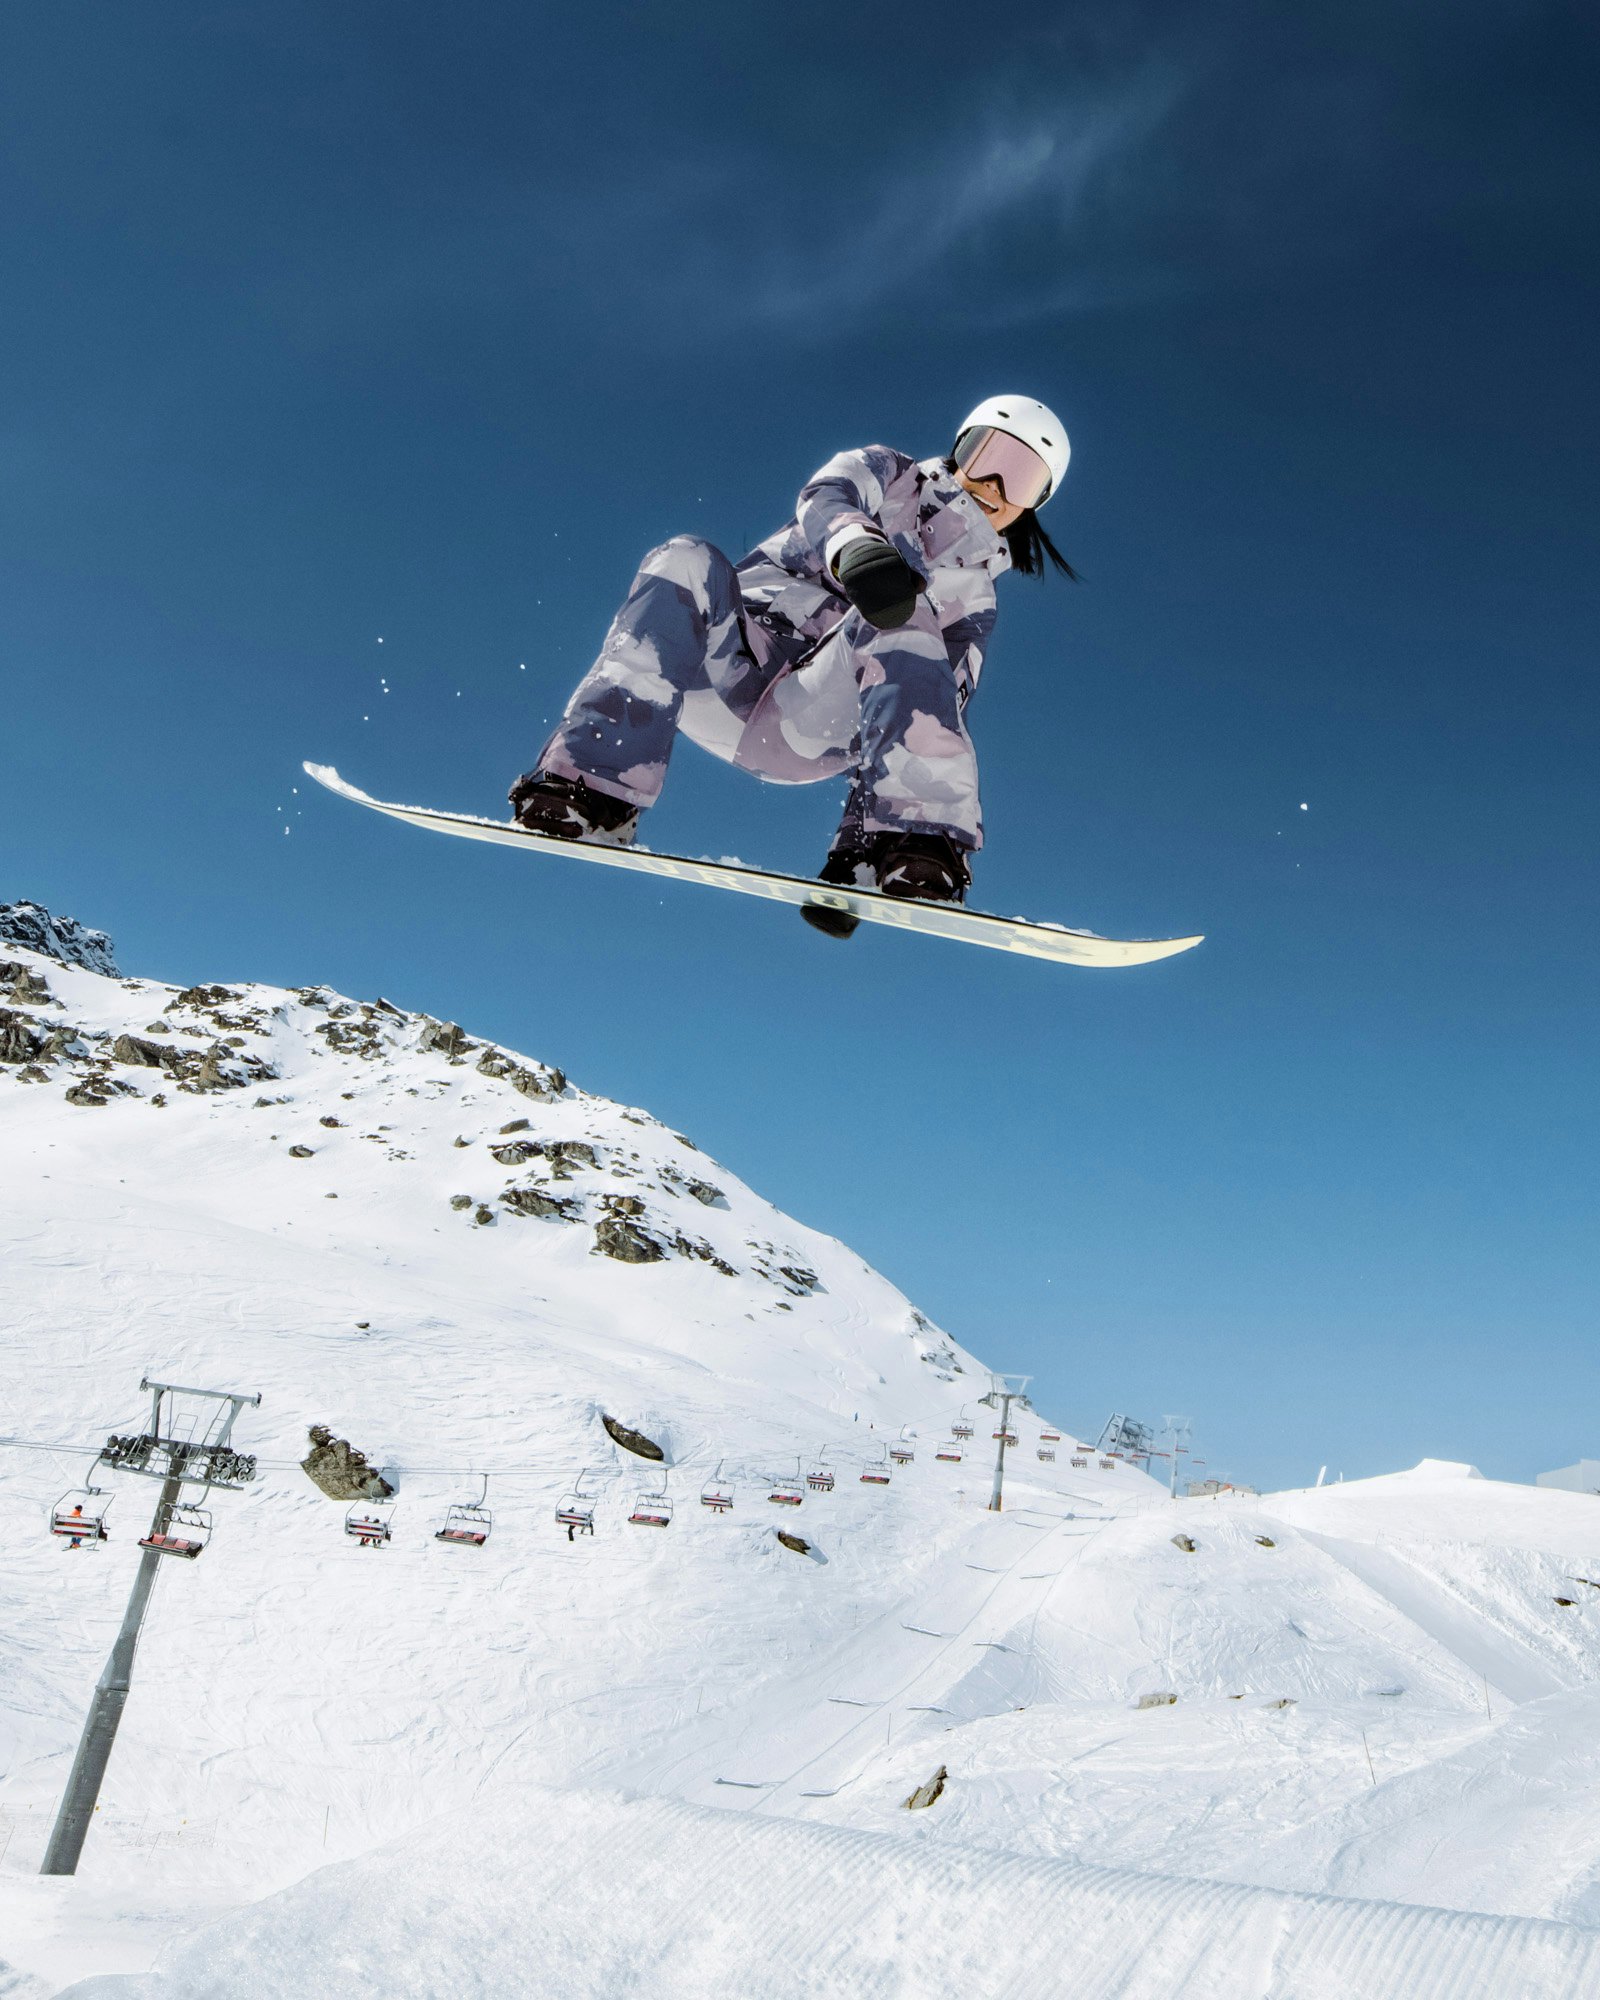 Who was the very first female professional snowboarder?